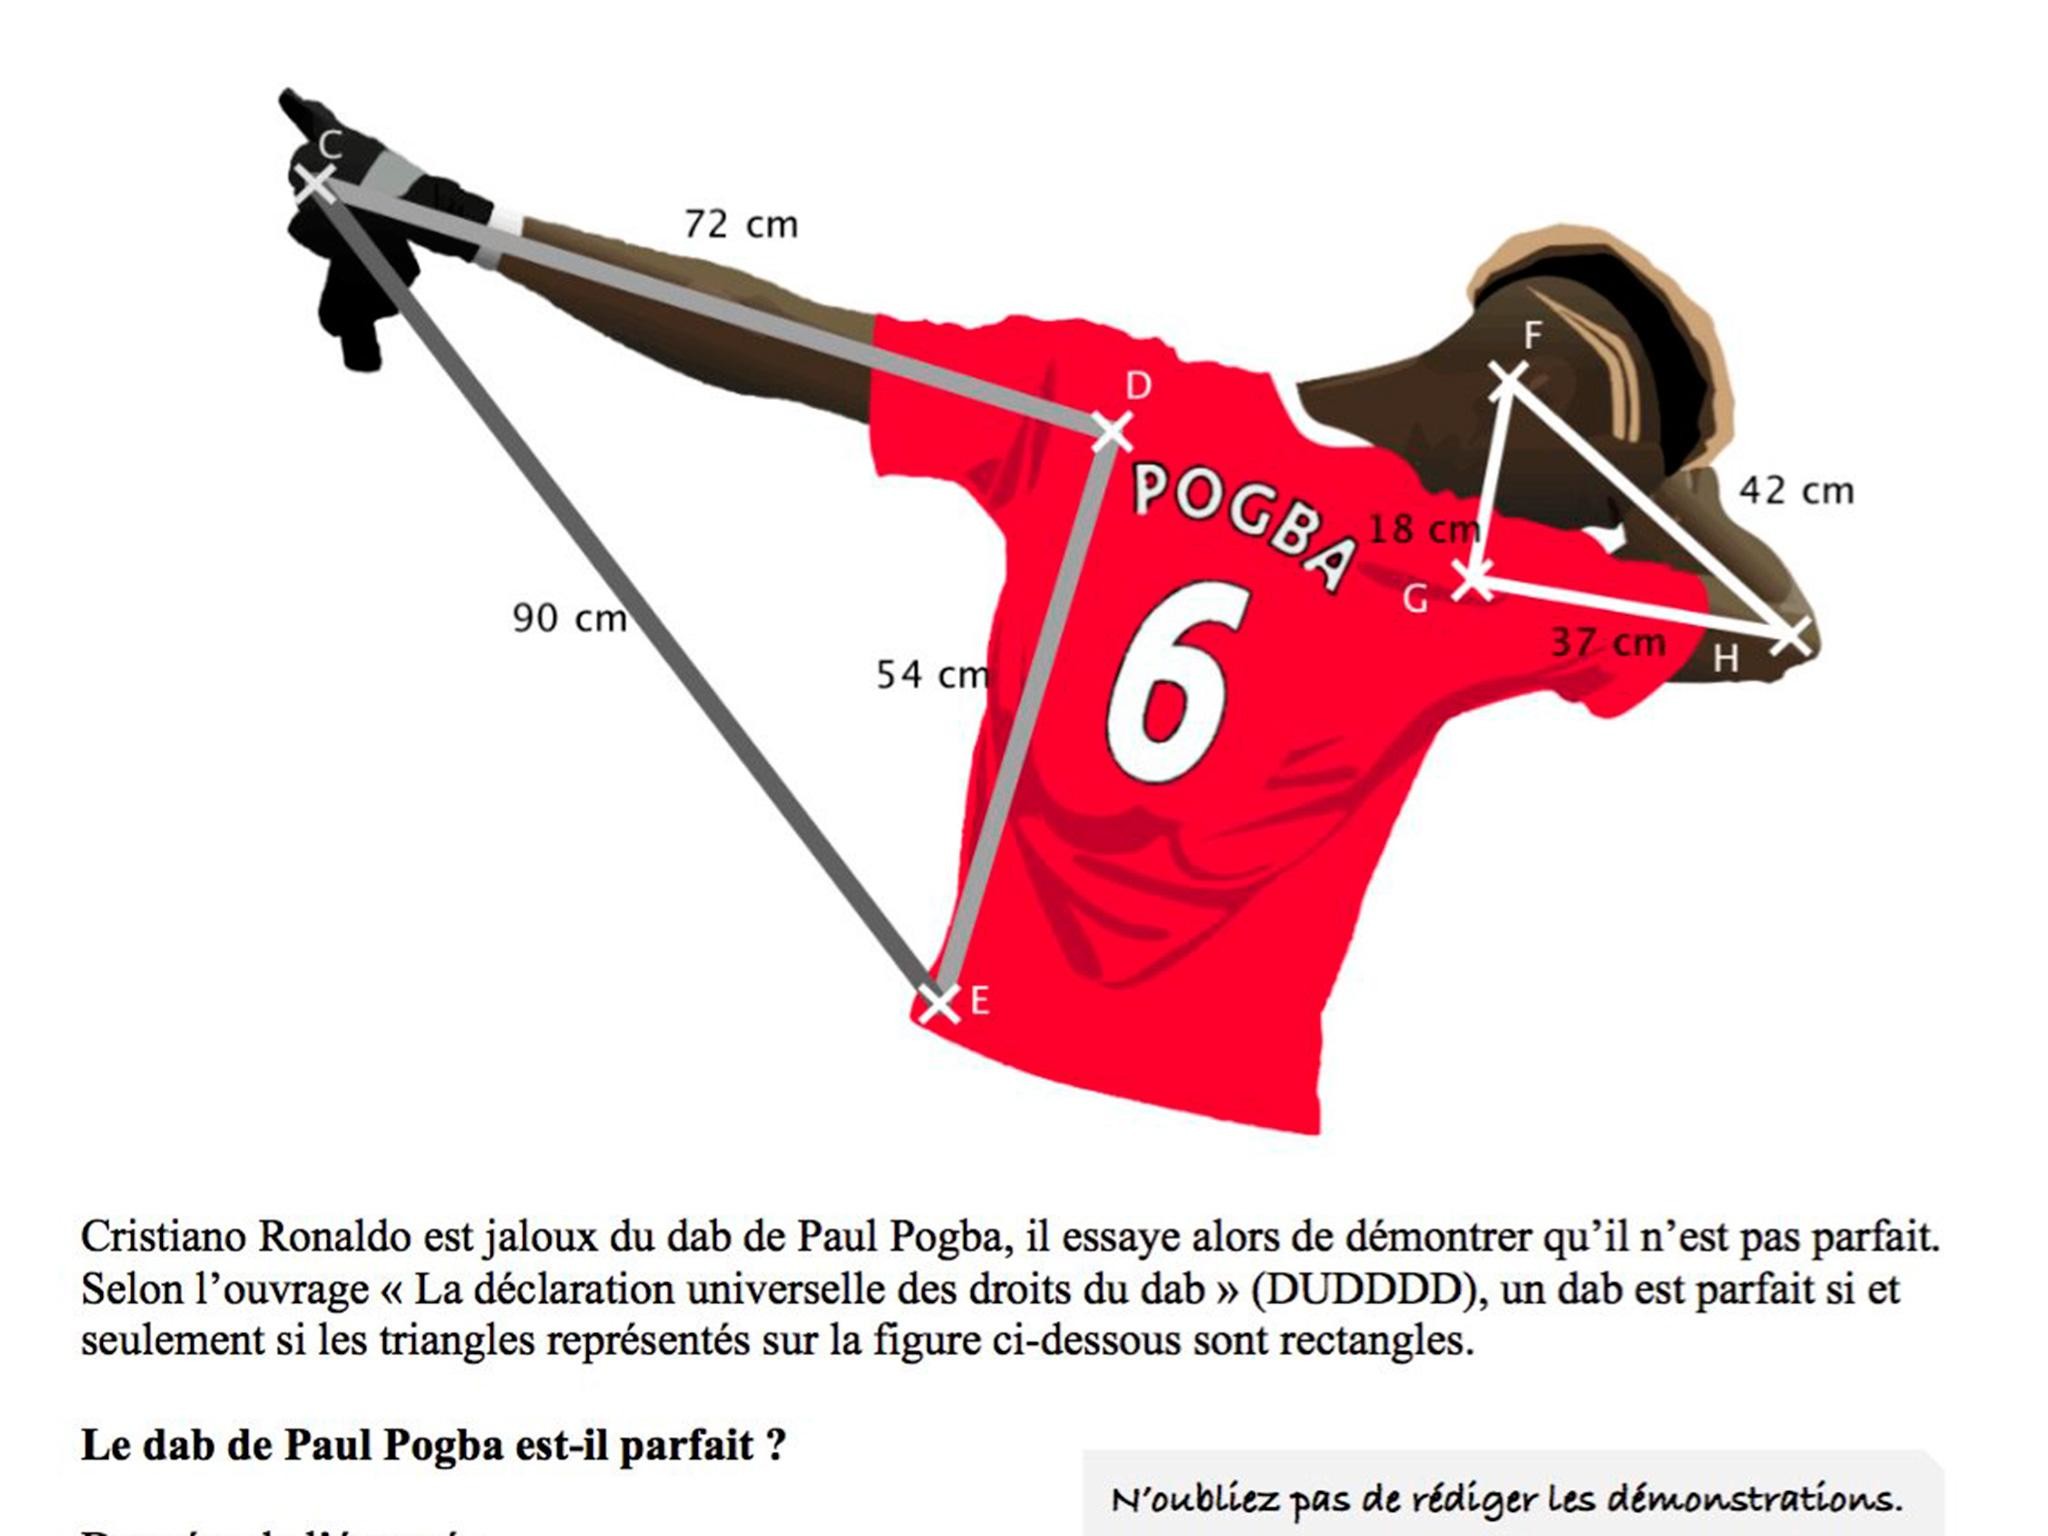 2048x1536 Manchester United: Can you answer this maths question based on Paul Pogba's  'dab' dance move? | The Independent